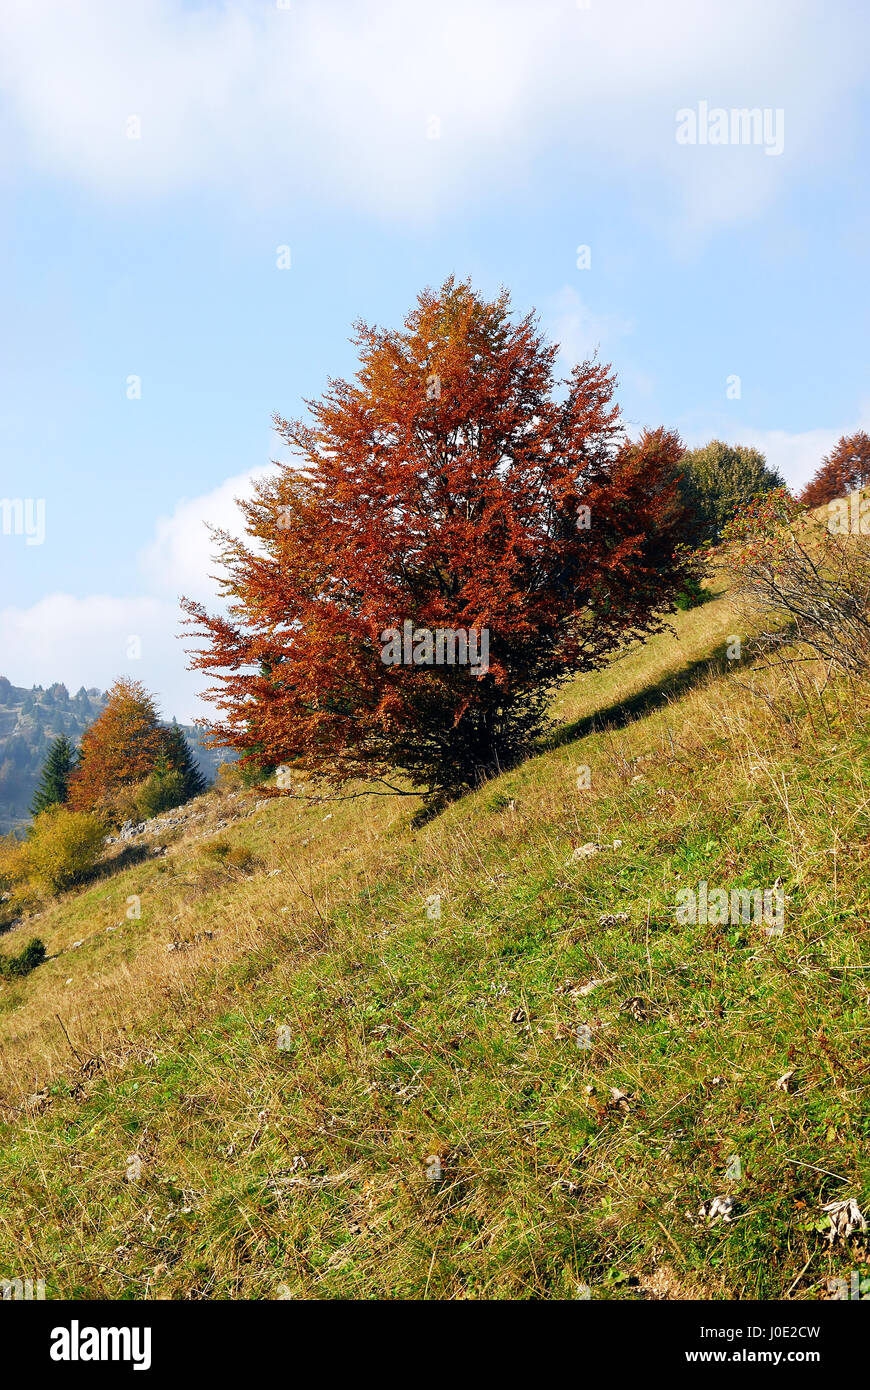 Mount Grappa, Veneto, Italy. Beech (Fagus) is a genus of ten species of deciduous trees in the family Fagaceae, native to temperate Europe, Asia and North America. Stock Photo